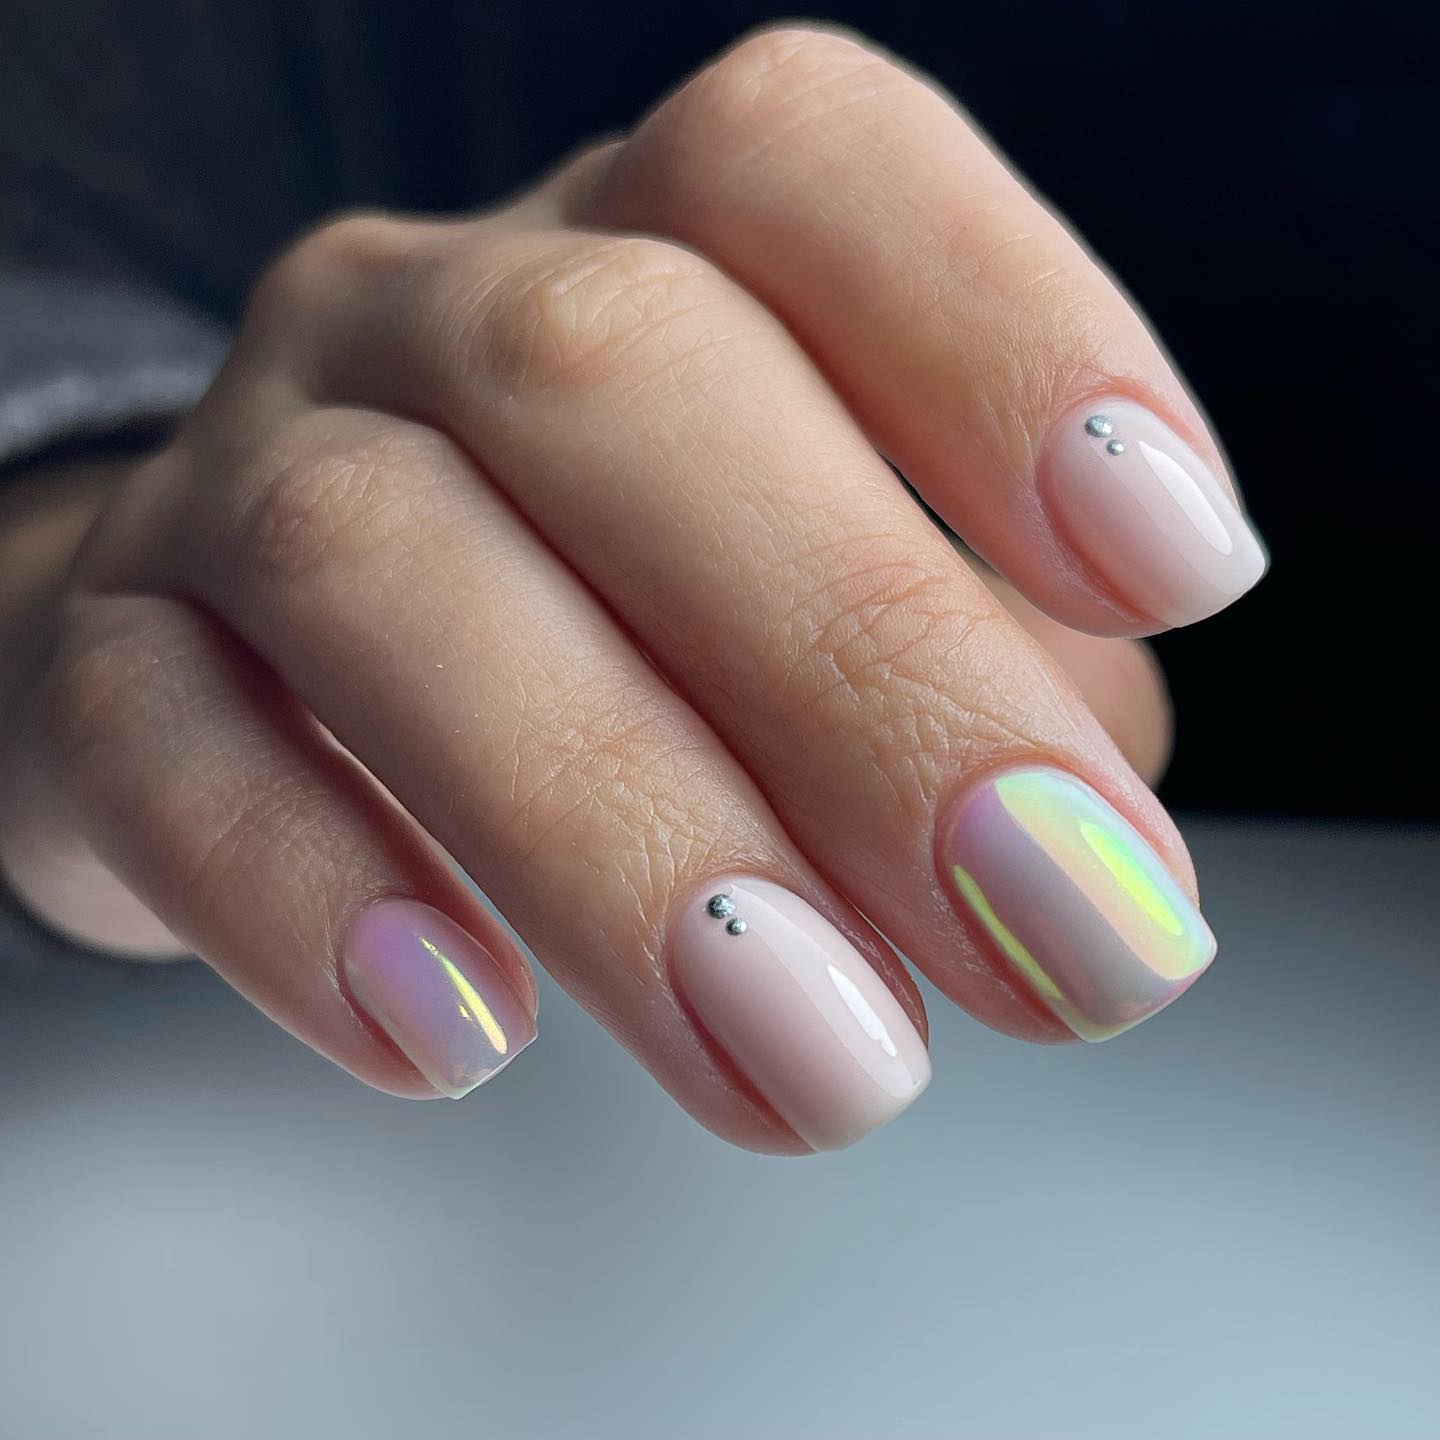 50+ Cute Short Nail Designs You’ll Want To Try Today images 21